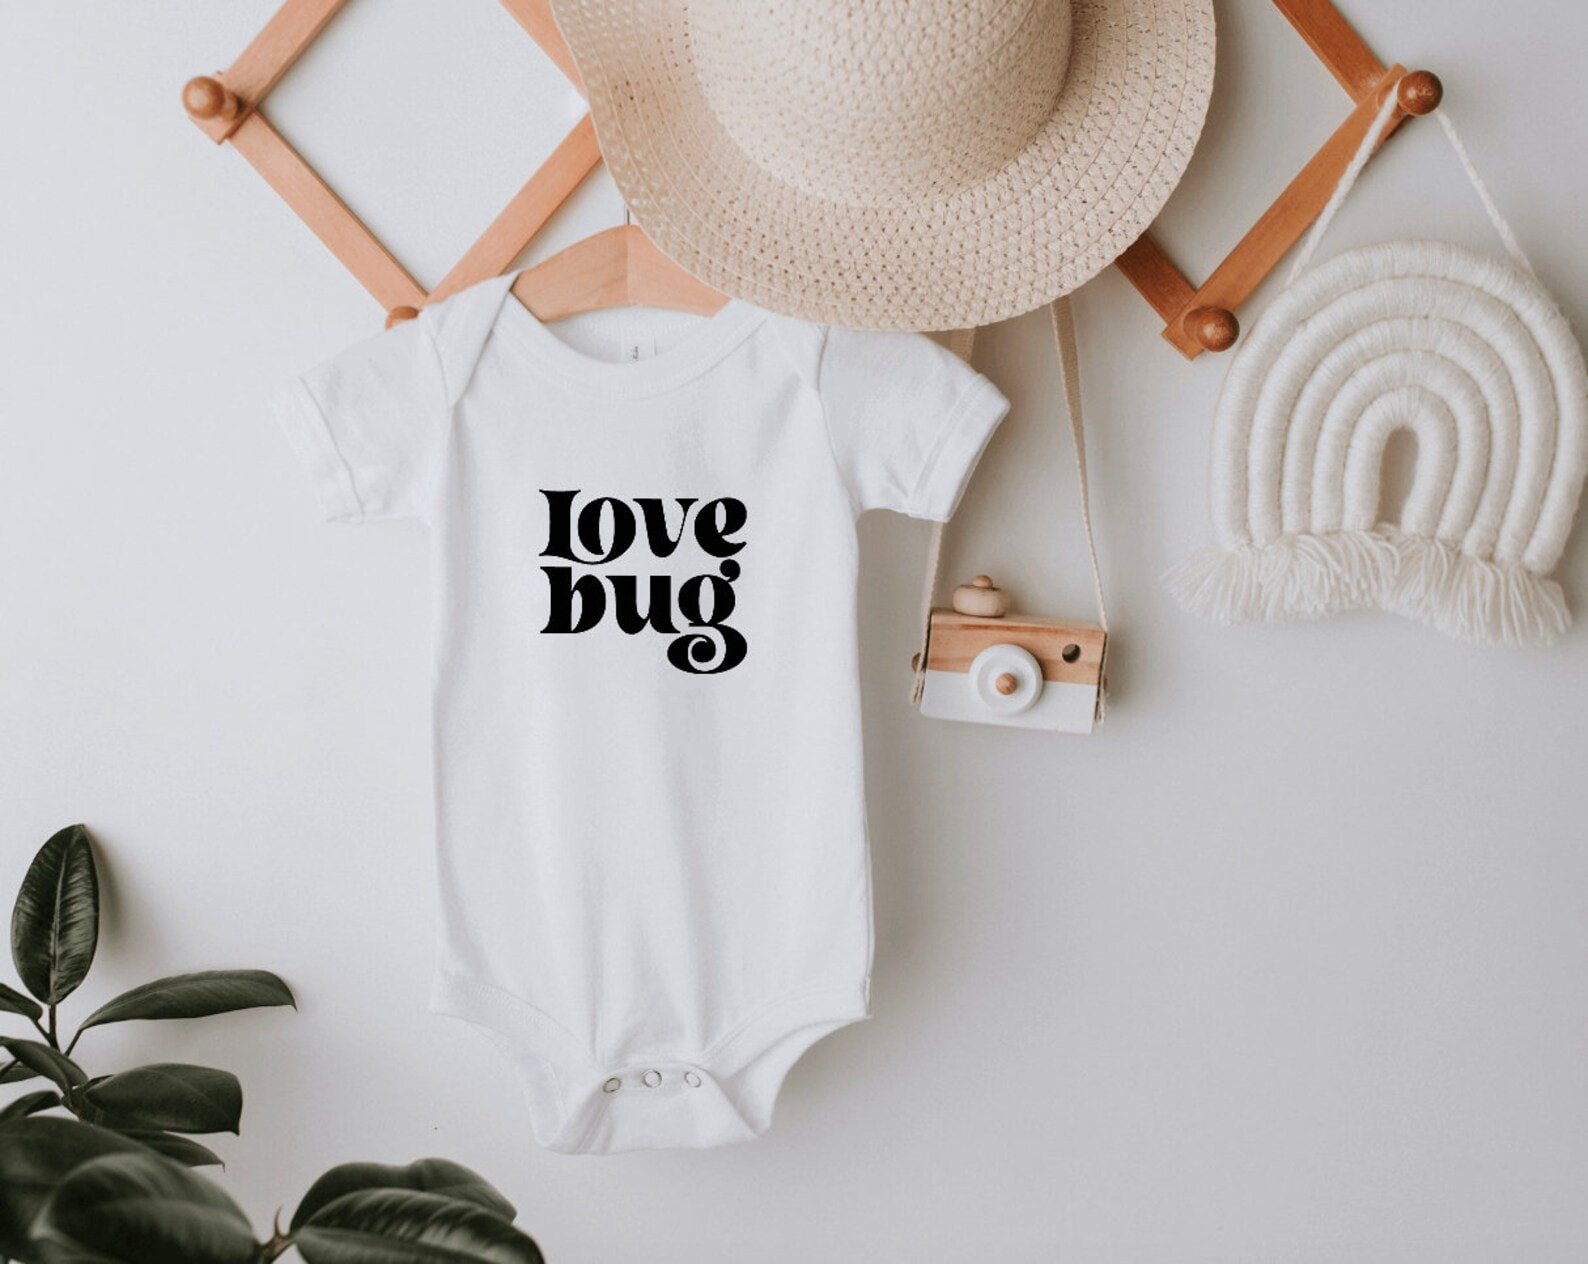 Love bug onesie in white and black 